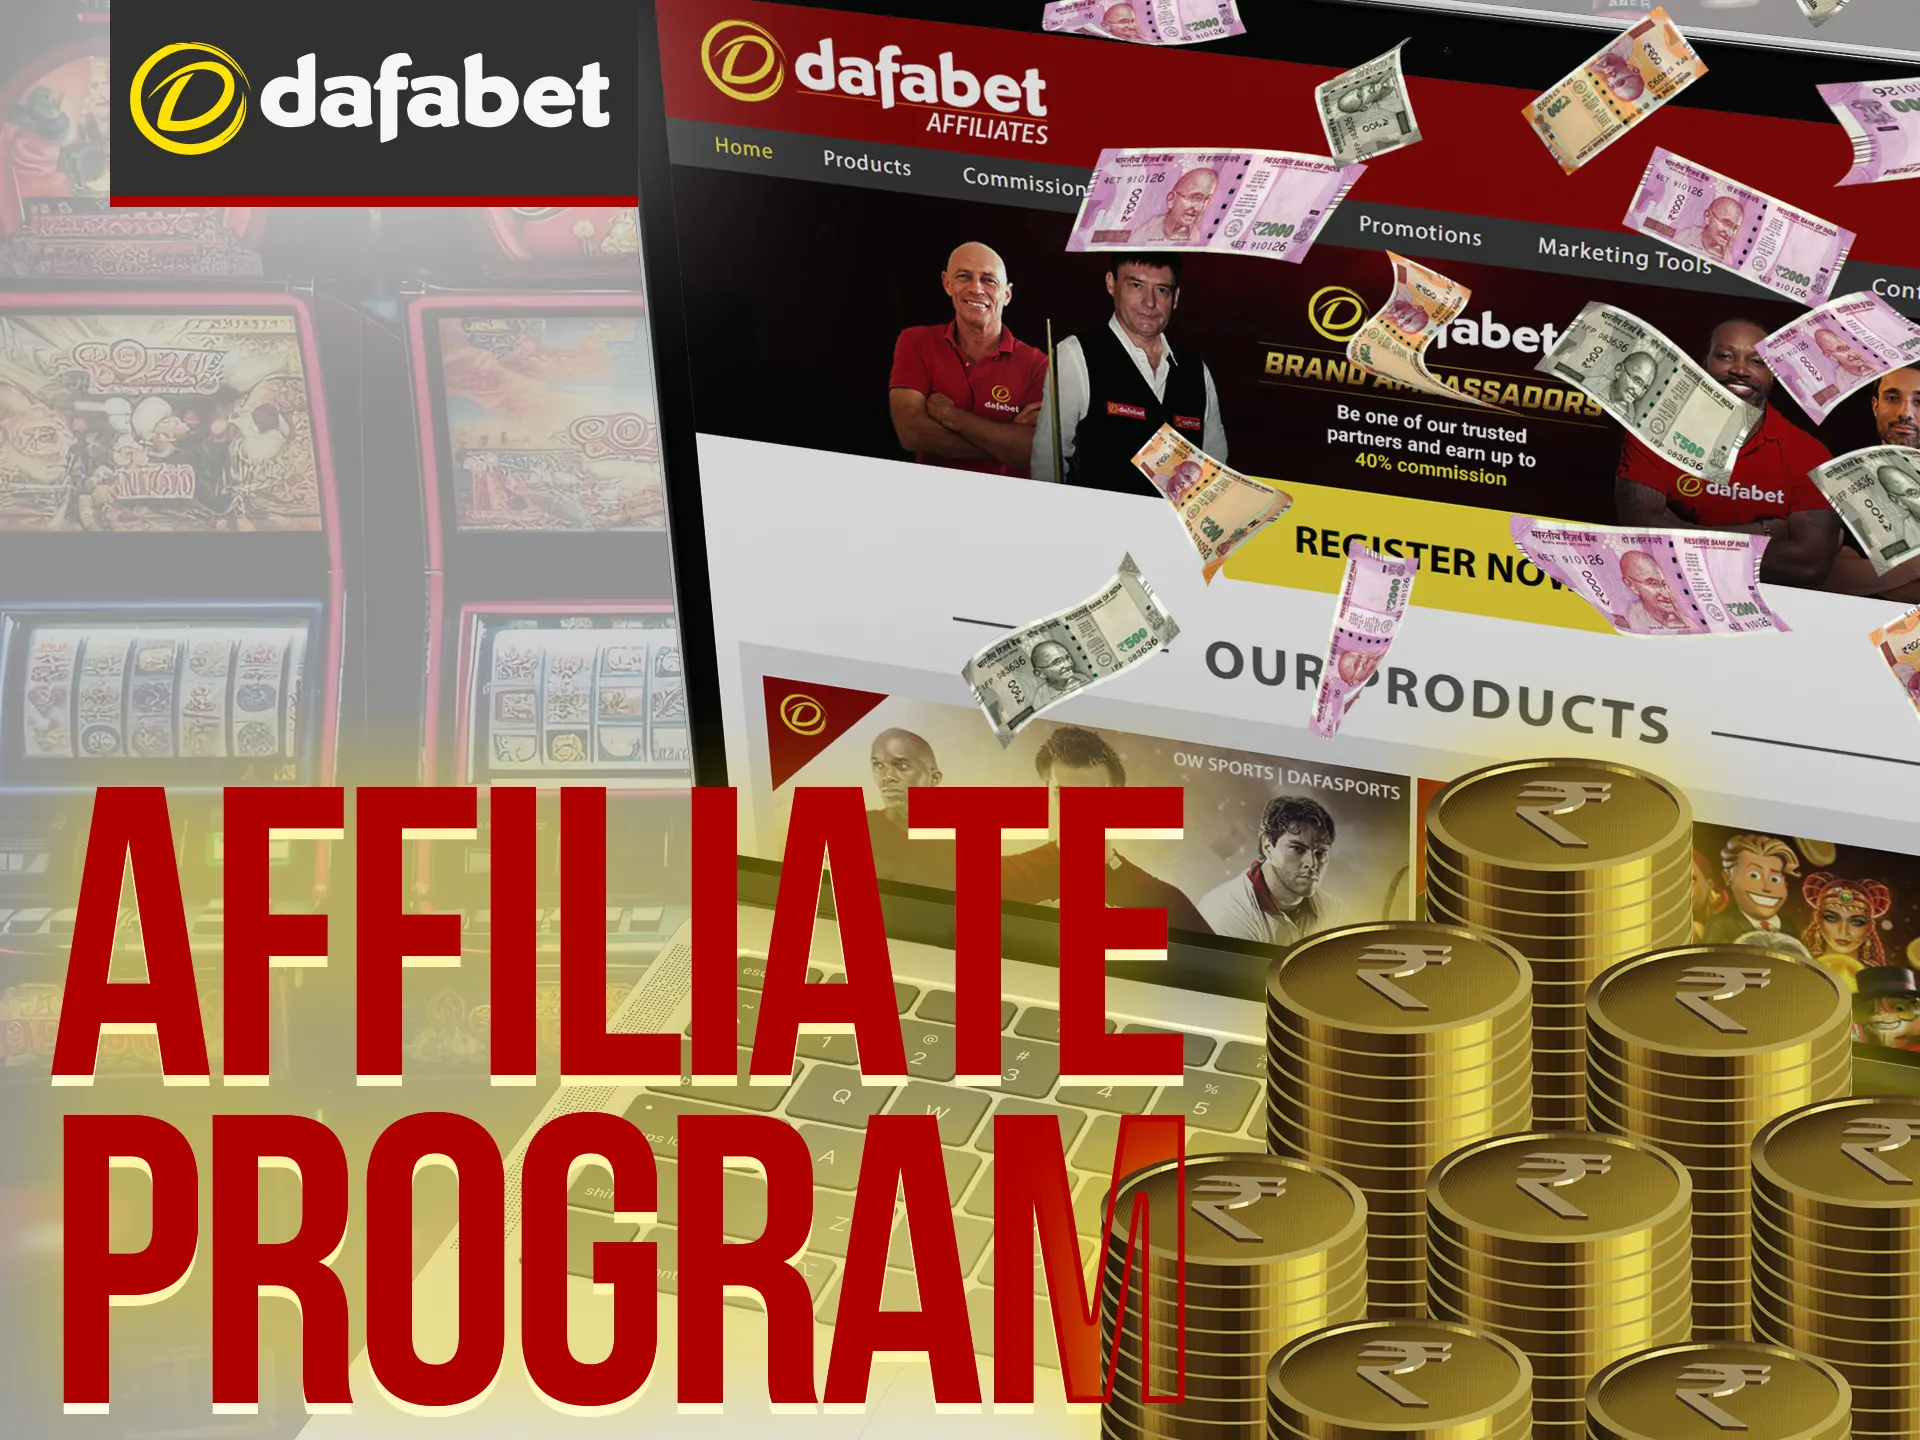 Indian site owners can join Dafabet affiliate program and earn 30-40% RevShare with various traffic sources.